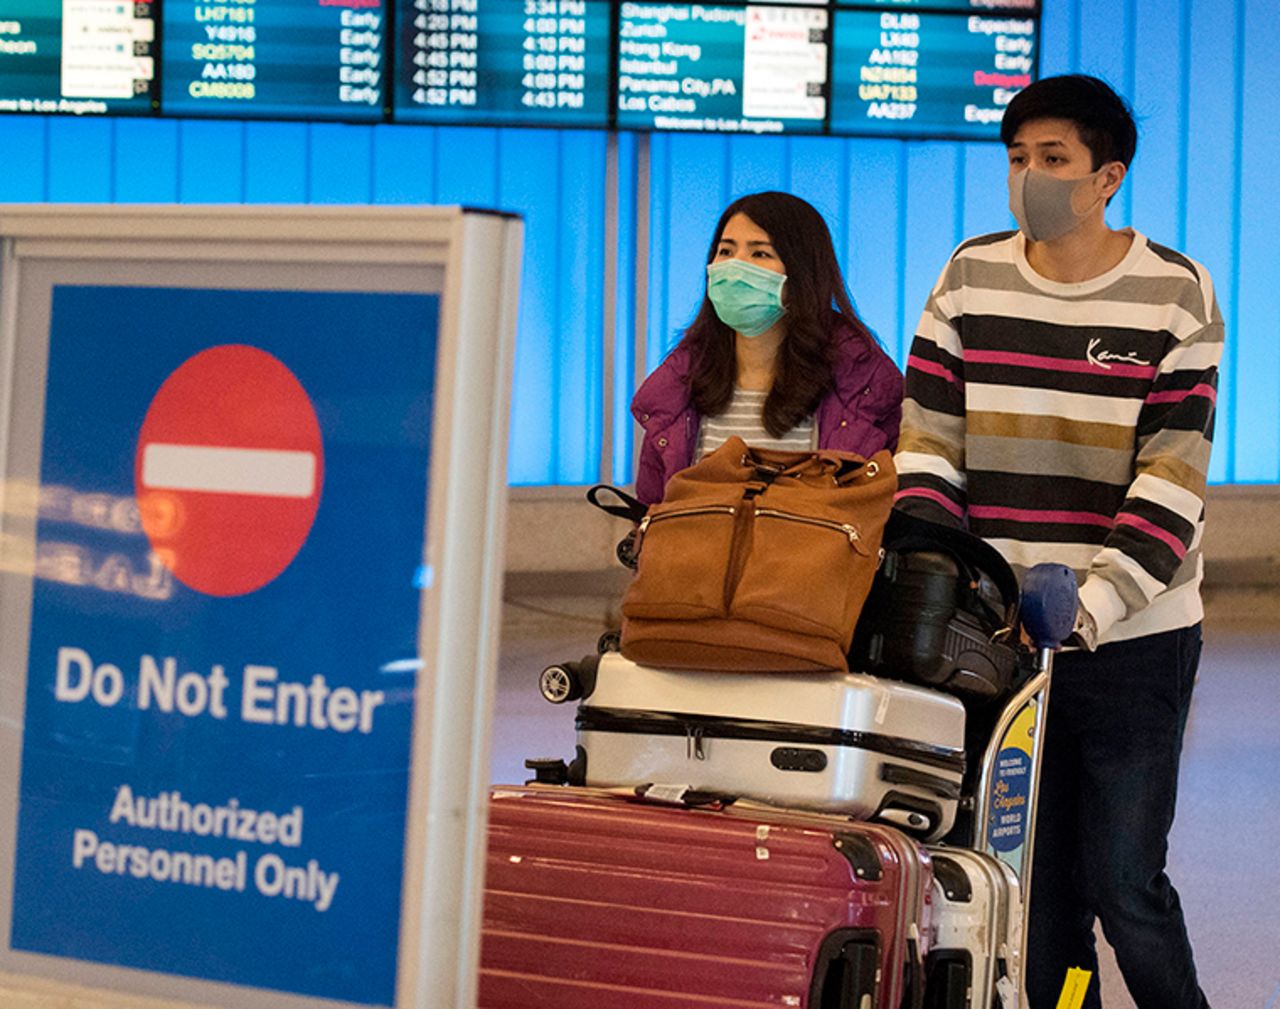 Passengers wear protective masks to protect against the spread of the coronavirus as they arrive at the Los Angeles International Airport  on January 22.